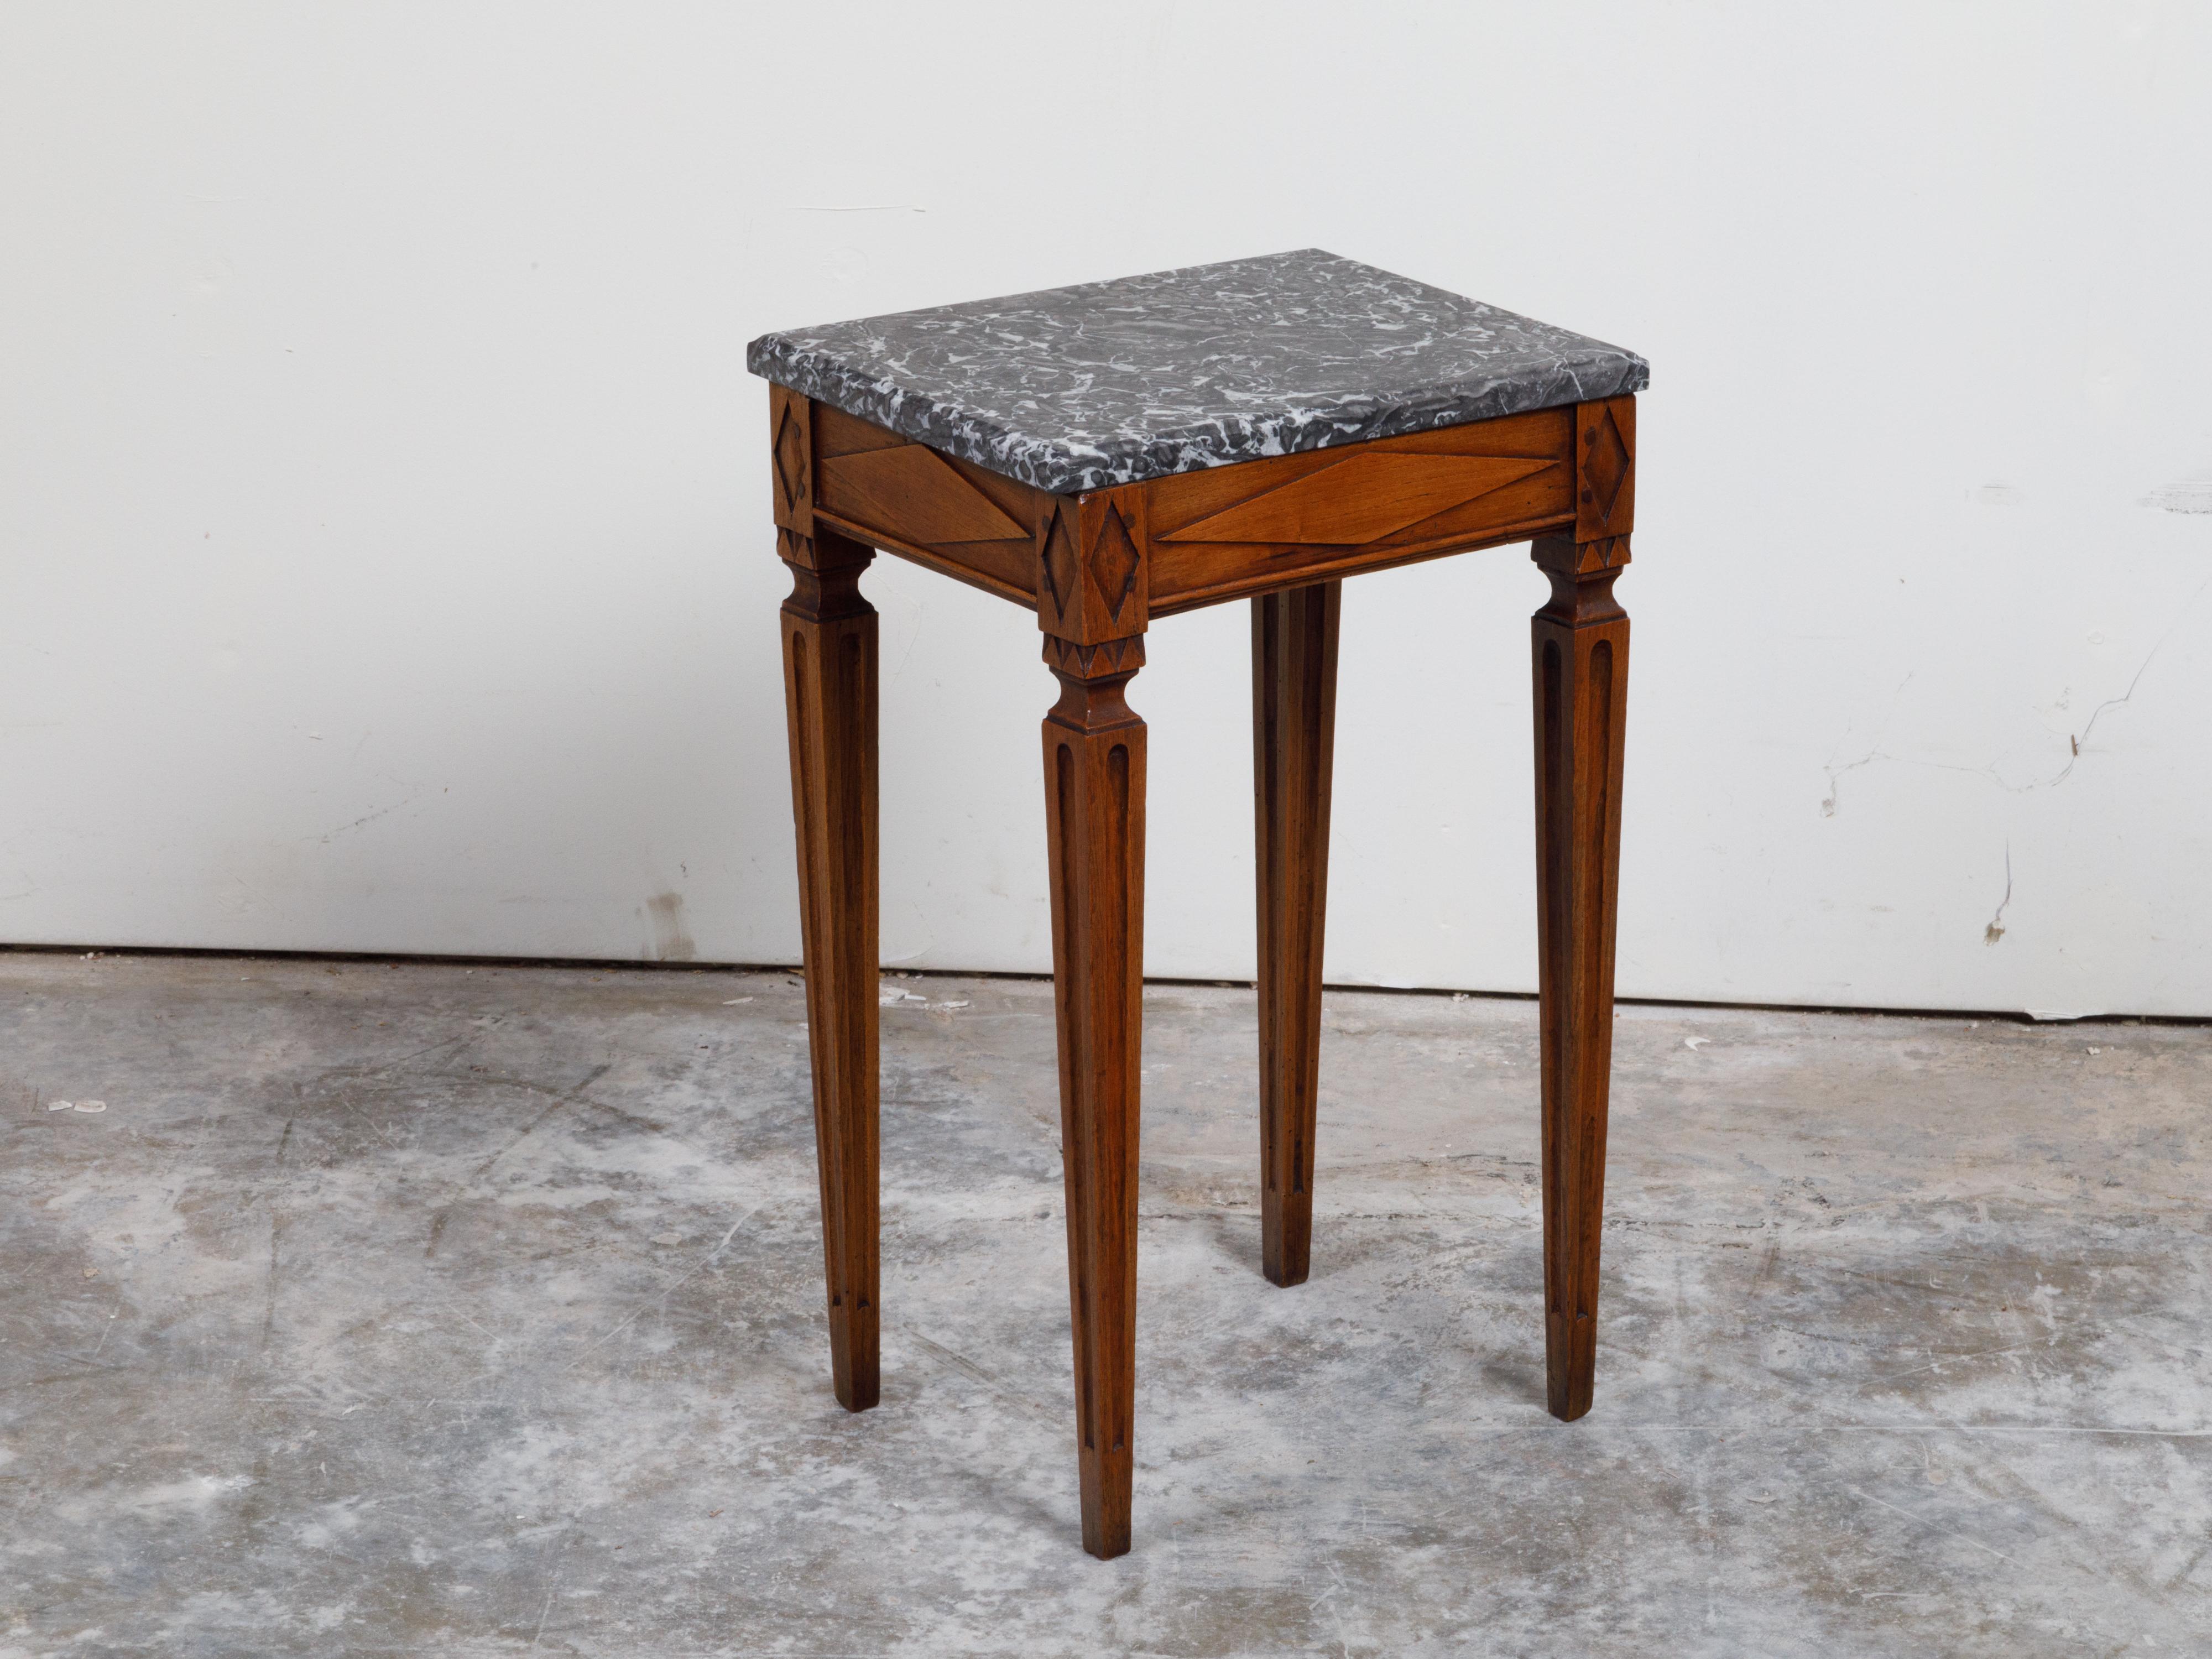 French Neoclassical Style 19th Century Wooden Table with Grey Veined Marble Top For Sale 8